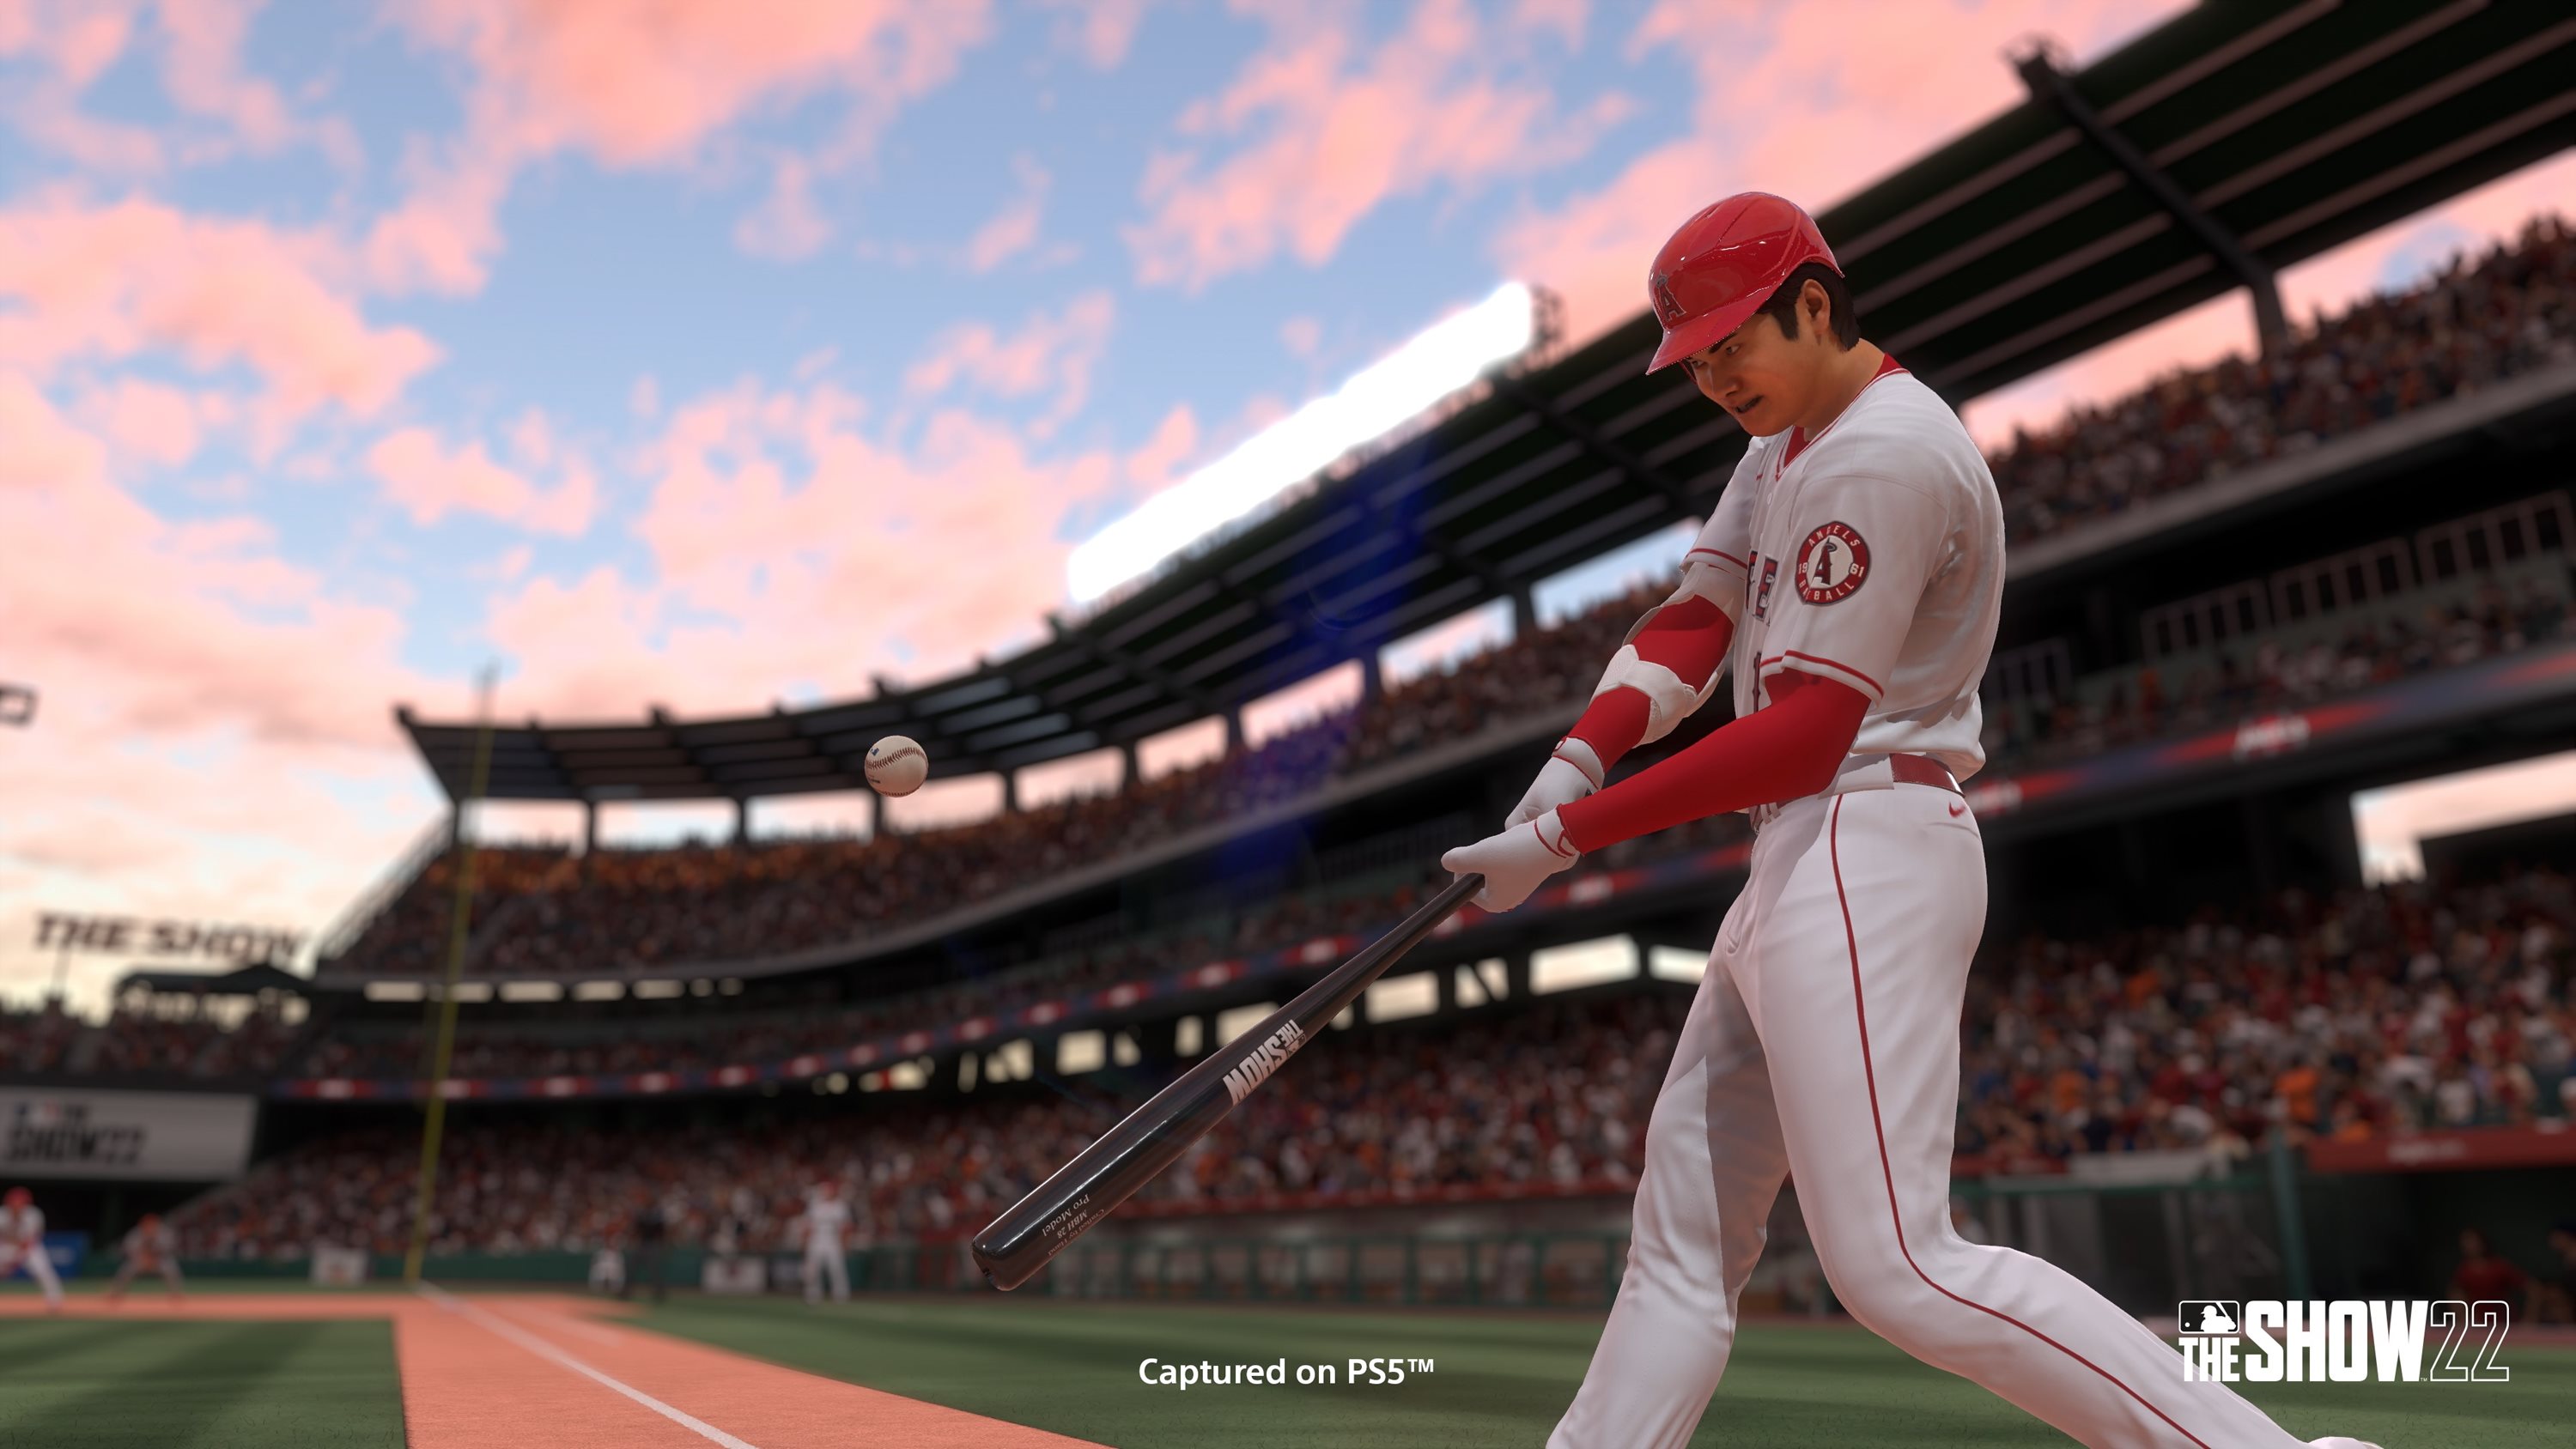 MLB The Show 22 for Playstation 4